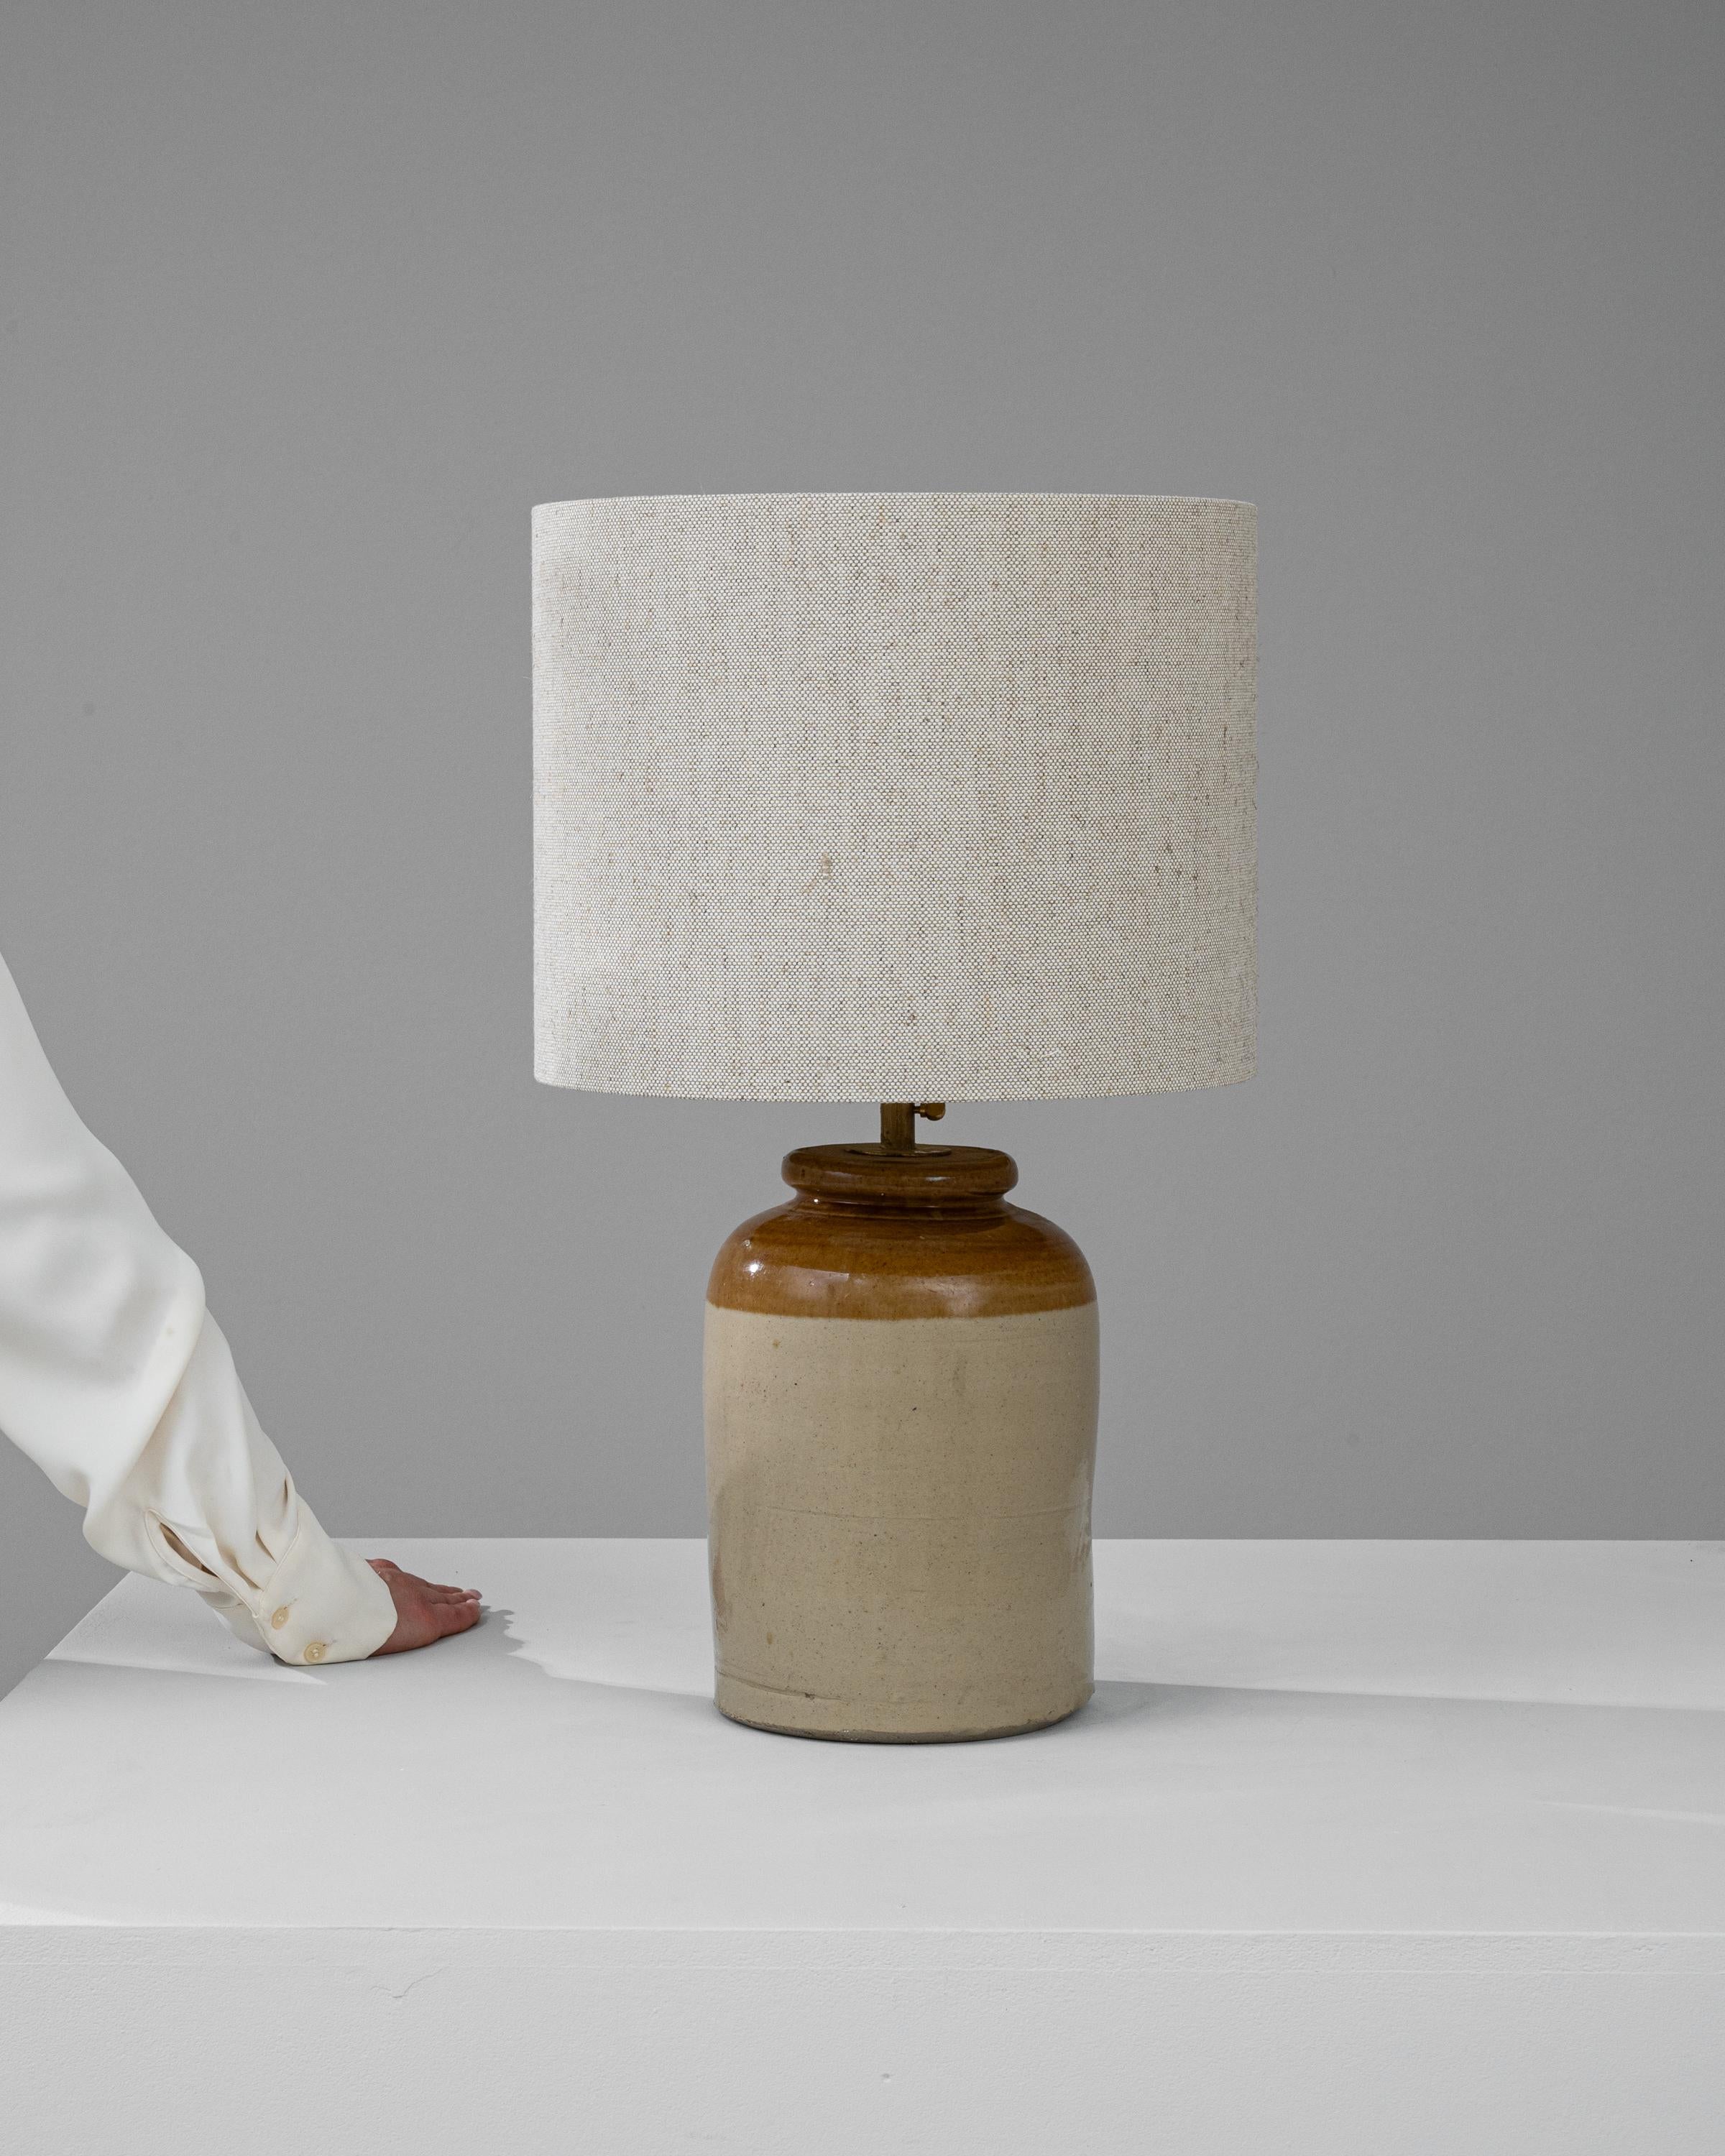 This Early 20th Century British Ceramic Table Lamp marries the unadorned grace of rustic pottery with the understated elegance of modern design. Its stout ceramic base, displaying a pleasing contrast between the natural beige body and the rich,